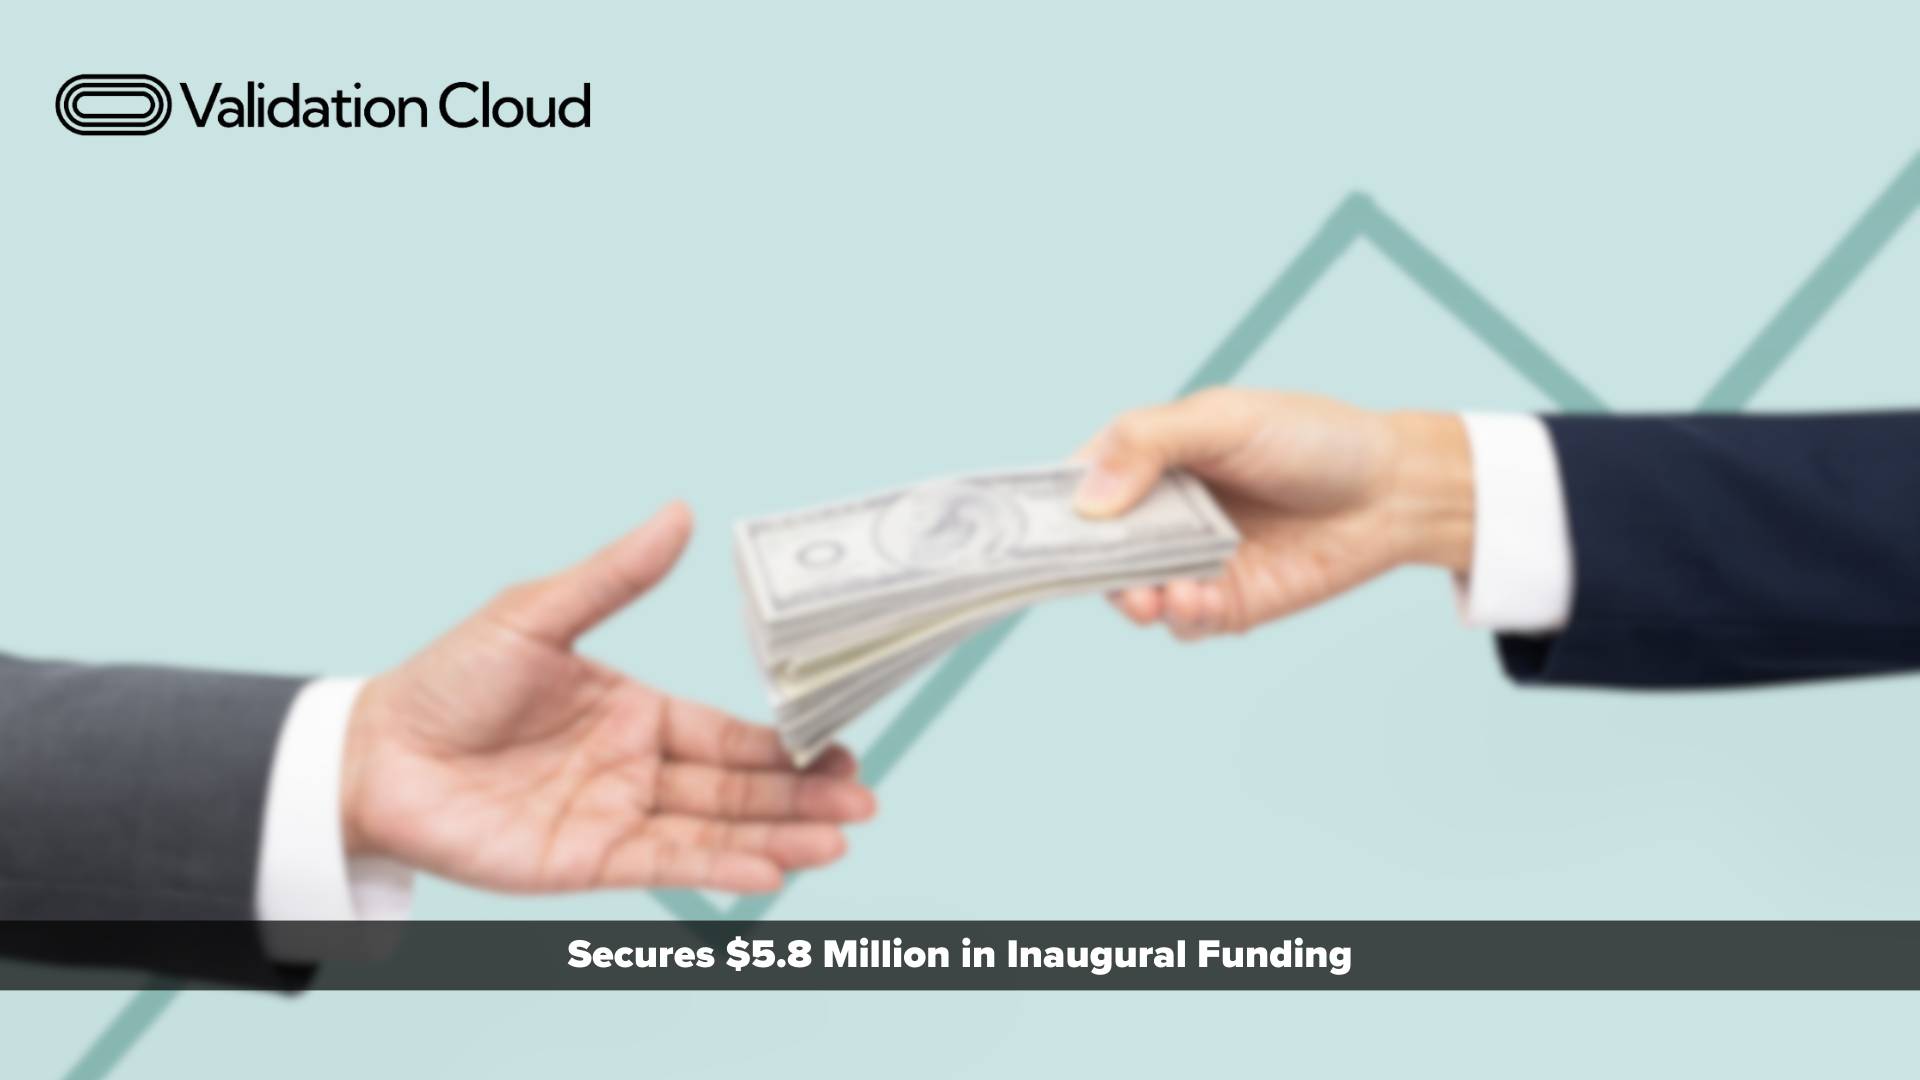 Validation Cloud Secures $5.8 Million in Inaugural Funding to Propel Web3 Infrastructure